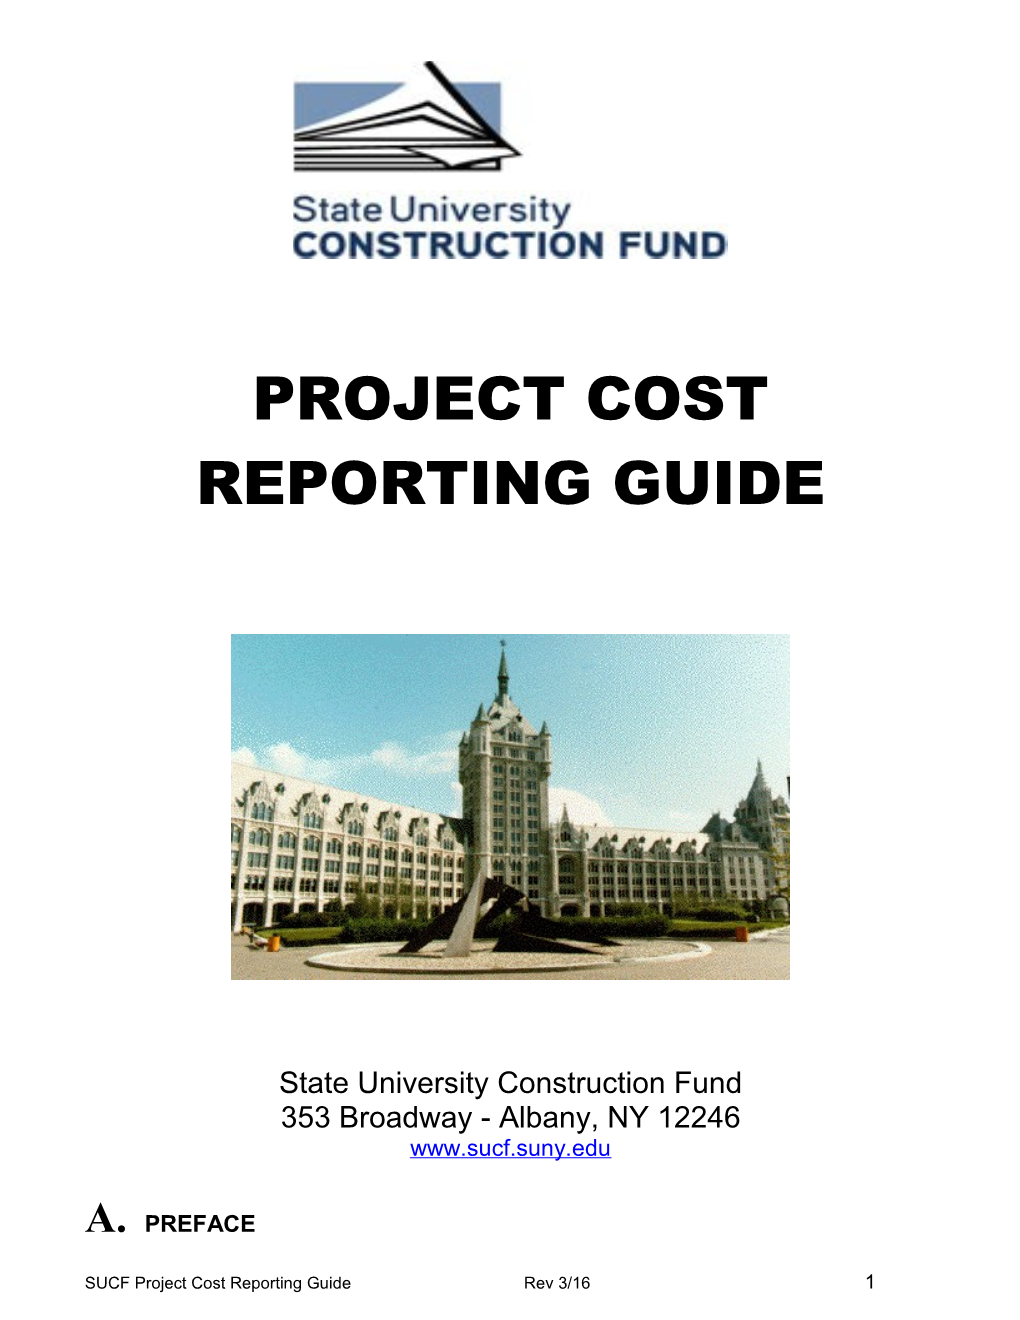 Project Cost Reporting Guide